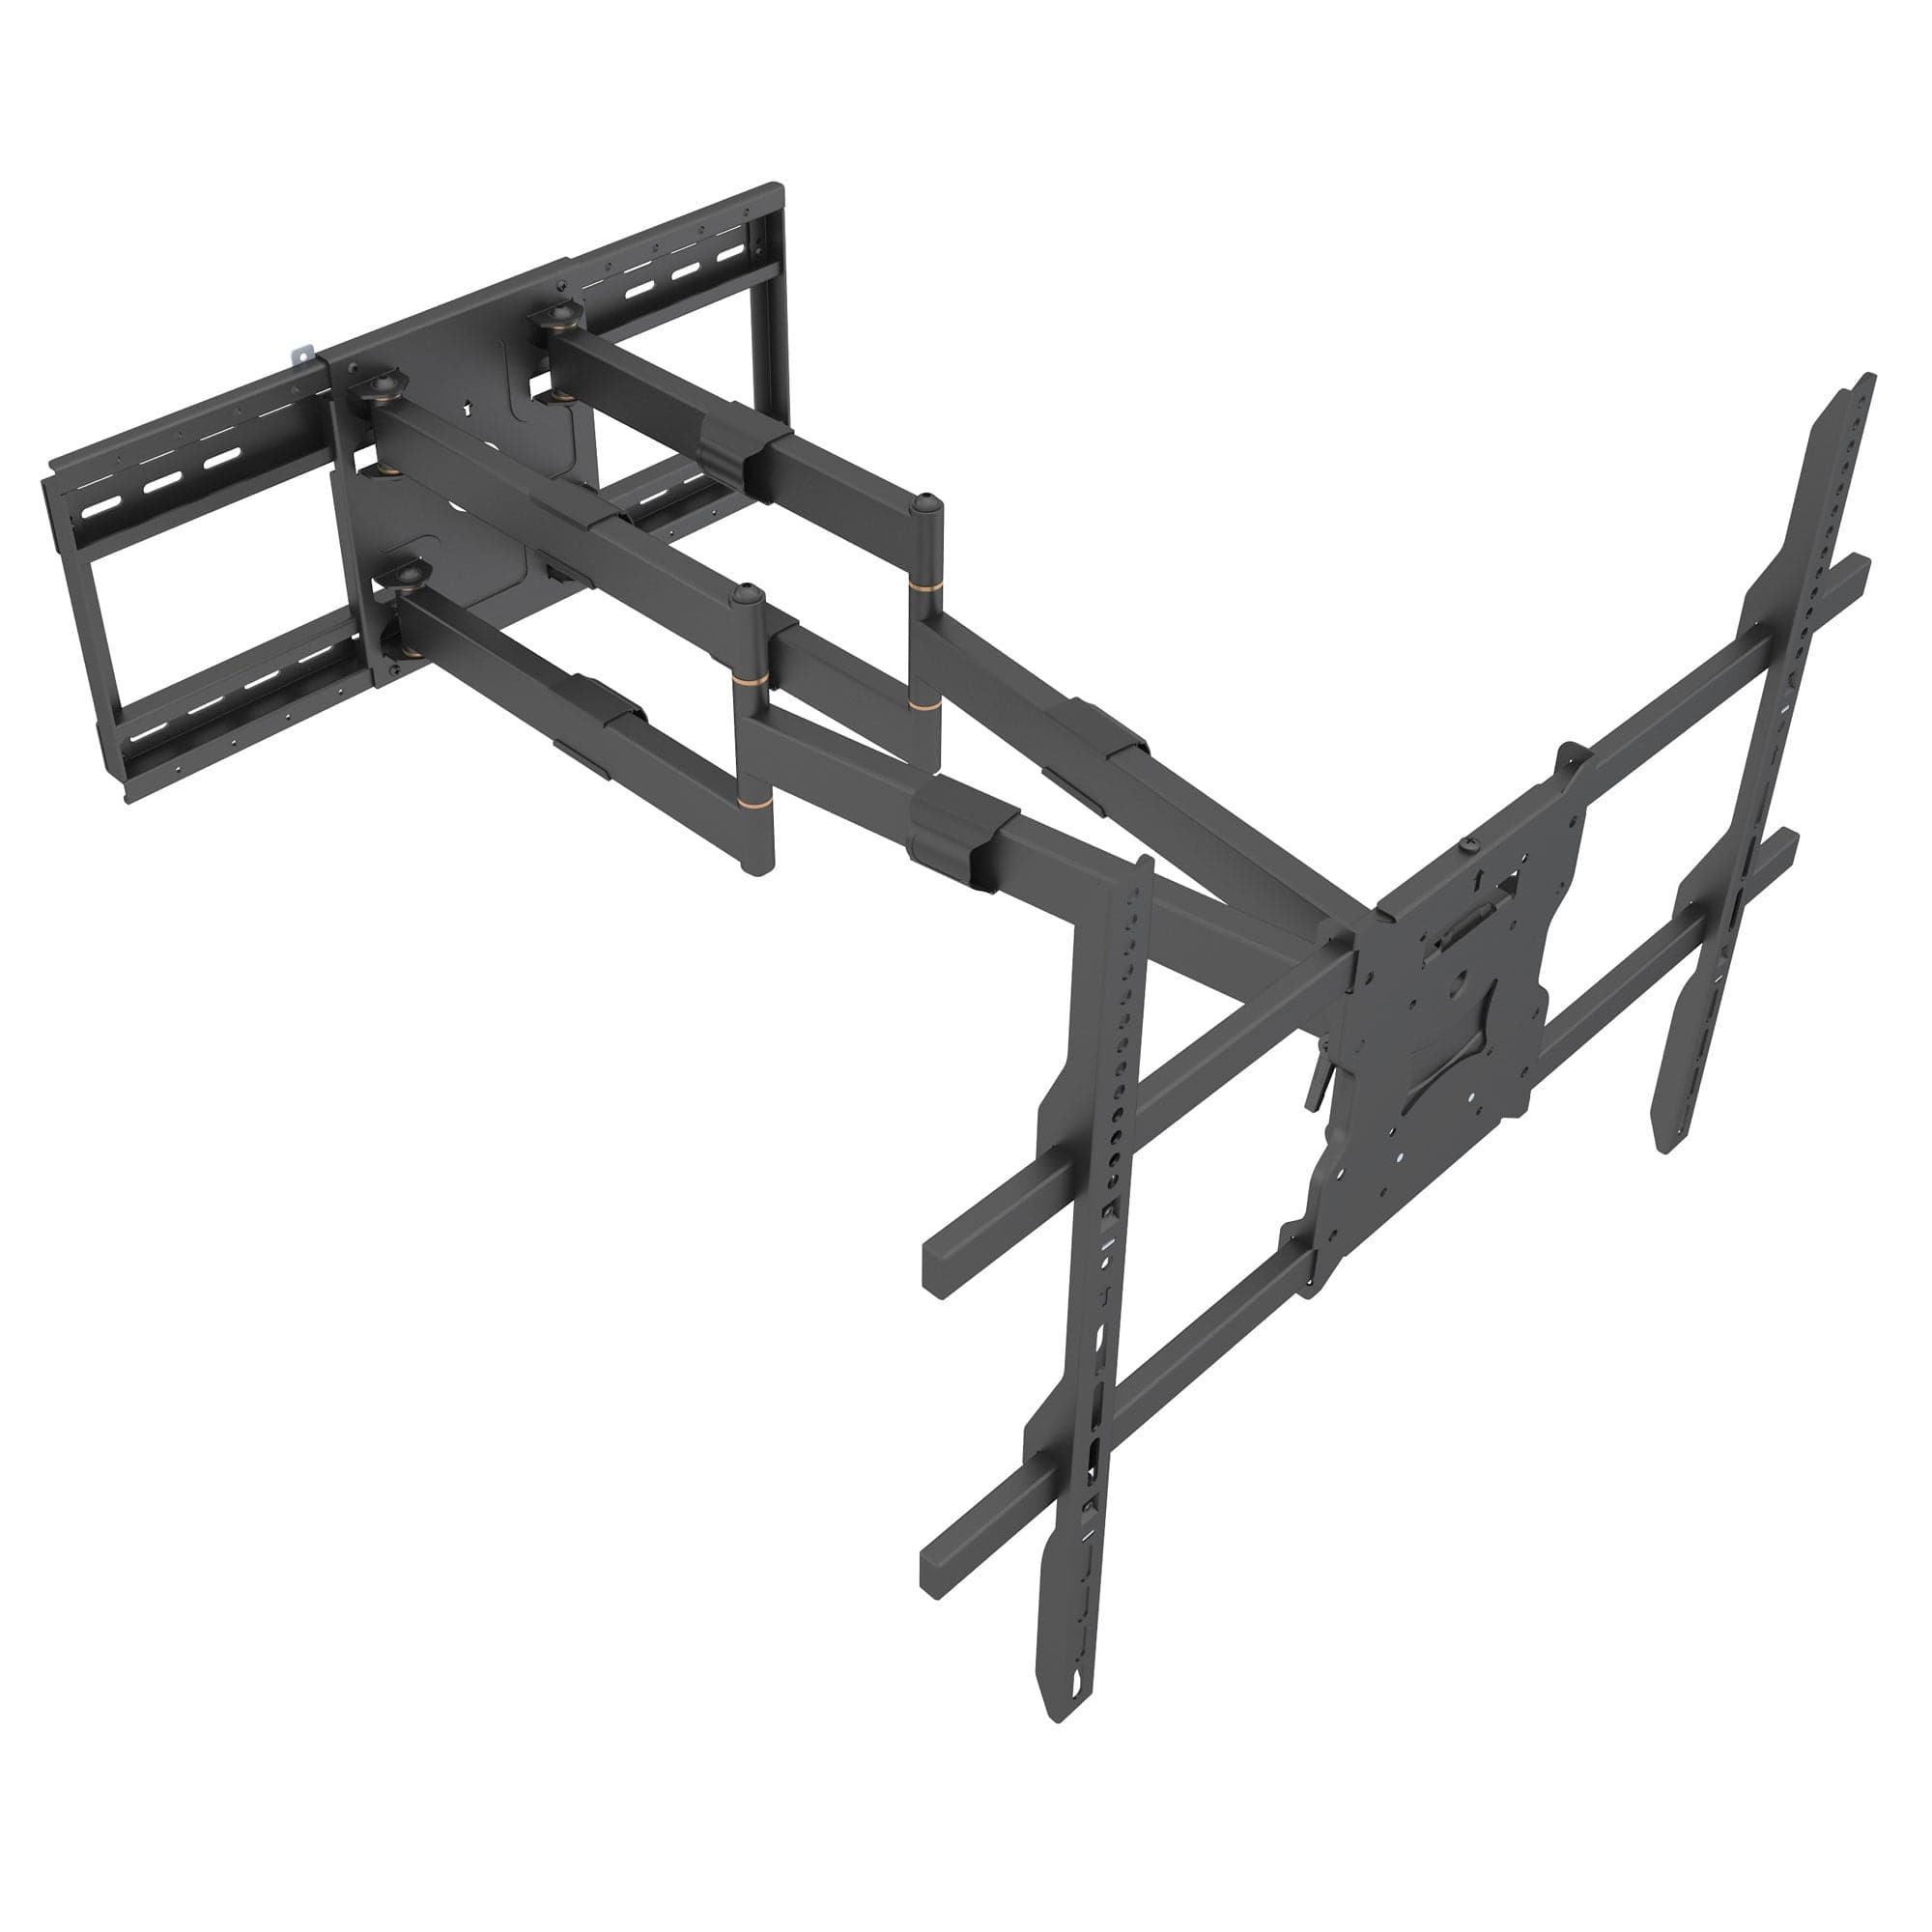 Mount-It! MI-394 Heavy Duty TV Wall Mount with Long Extension Arms for 65-110 TVs